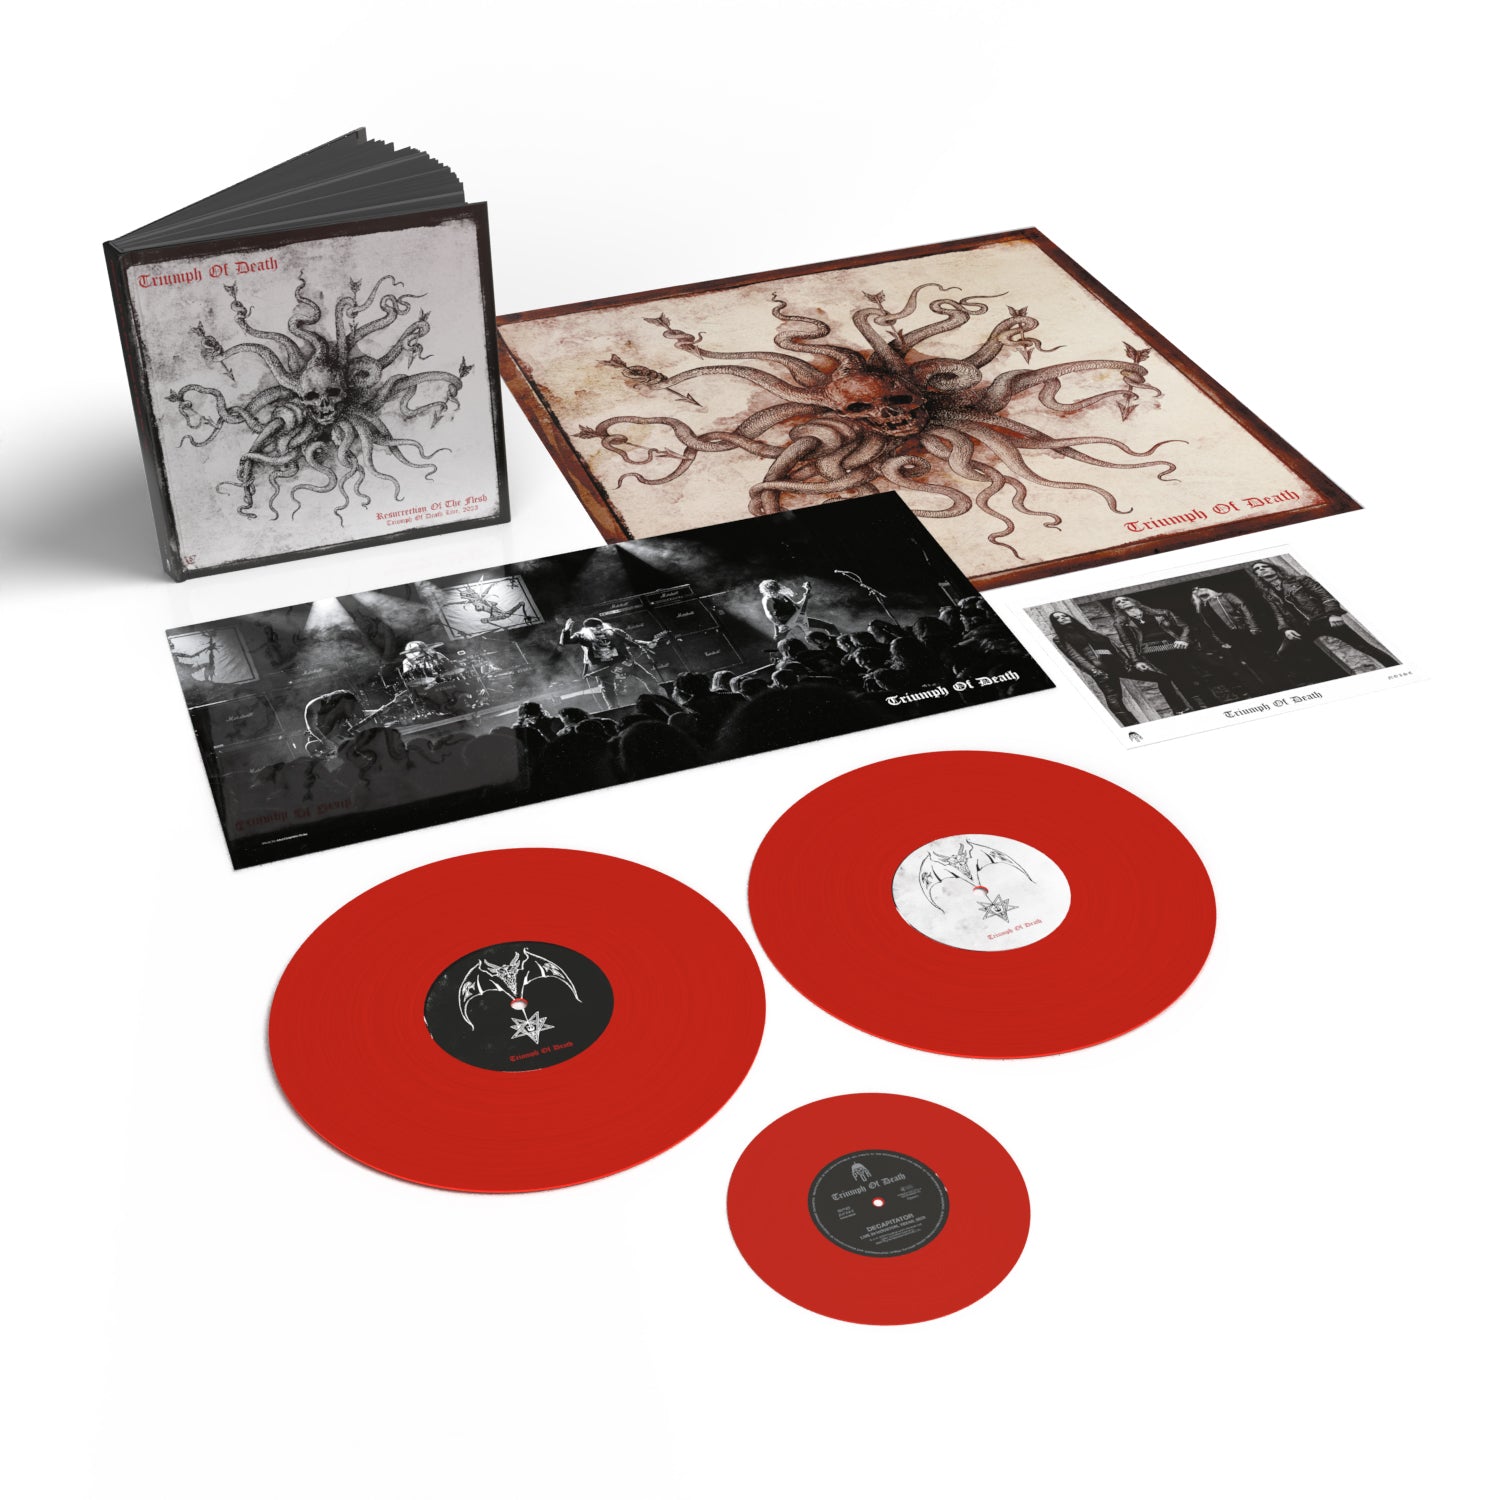 Triumph Of Death - Resurrection Of The Flesh [Deluxe Edition - Bookpack]: Deluxe Red Vinyl 2LP & 7” Single Bookpack